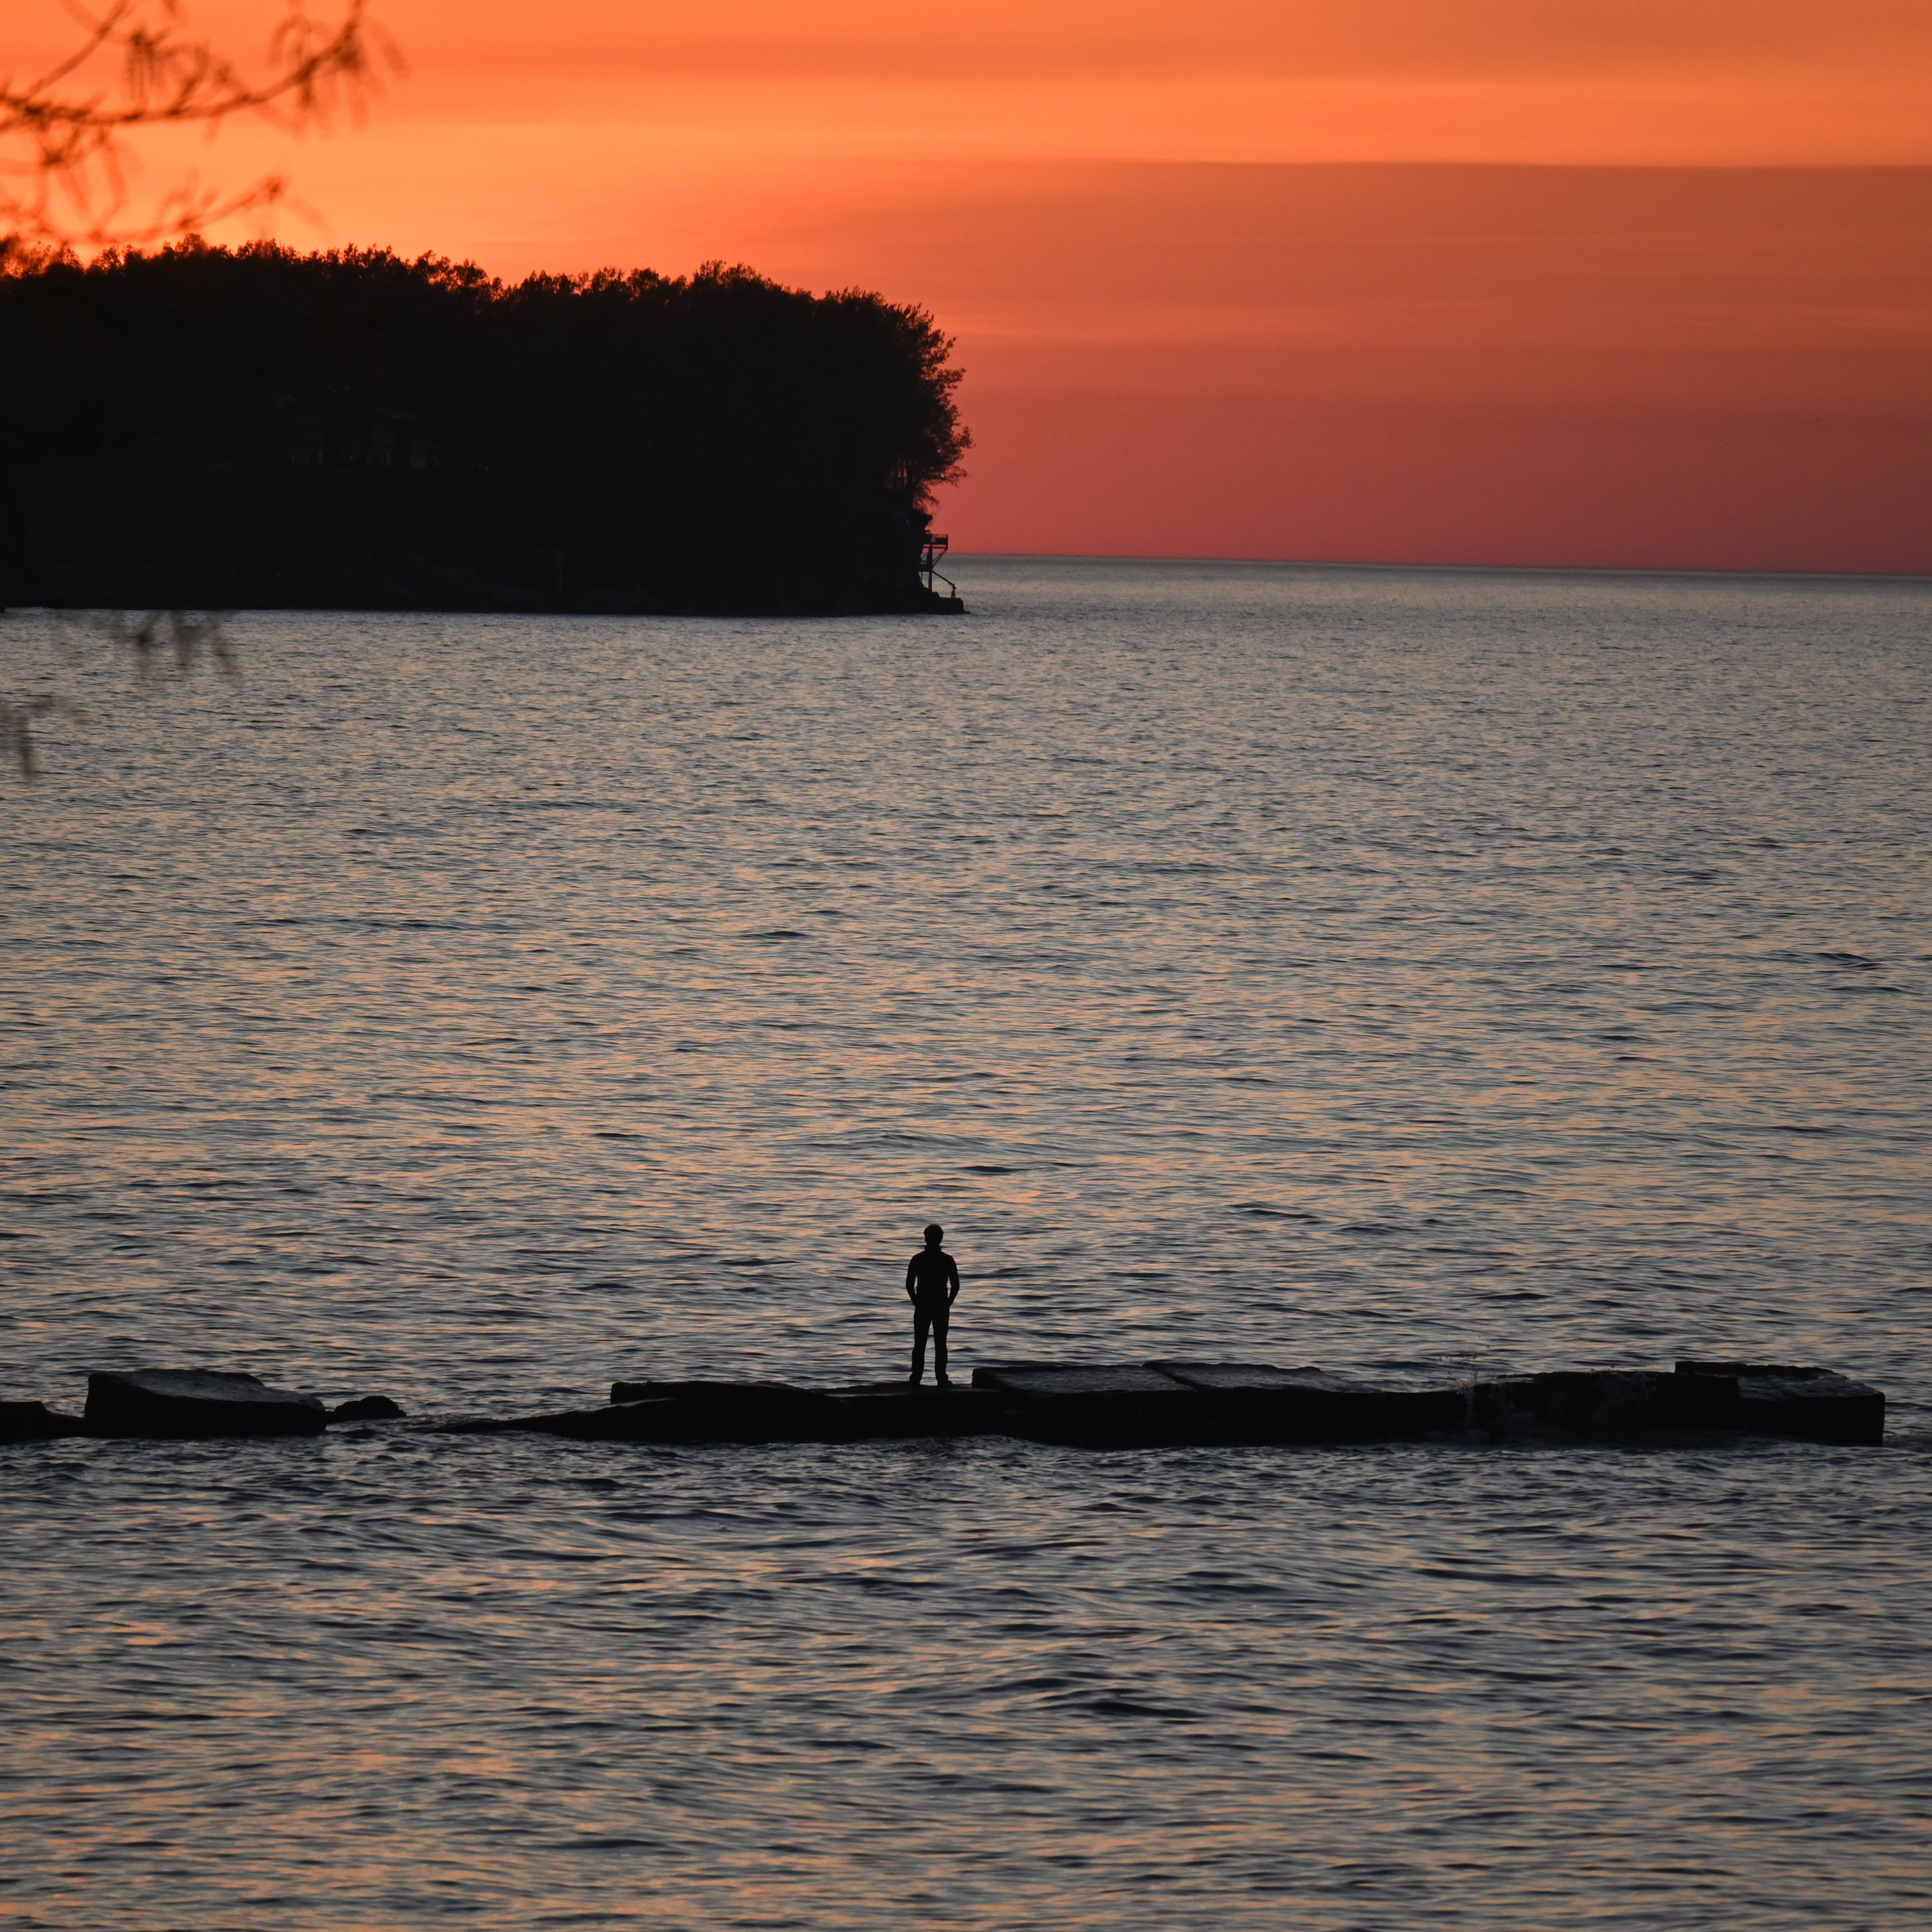 A person watching the sun set on a rocky pier.